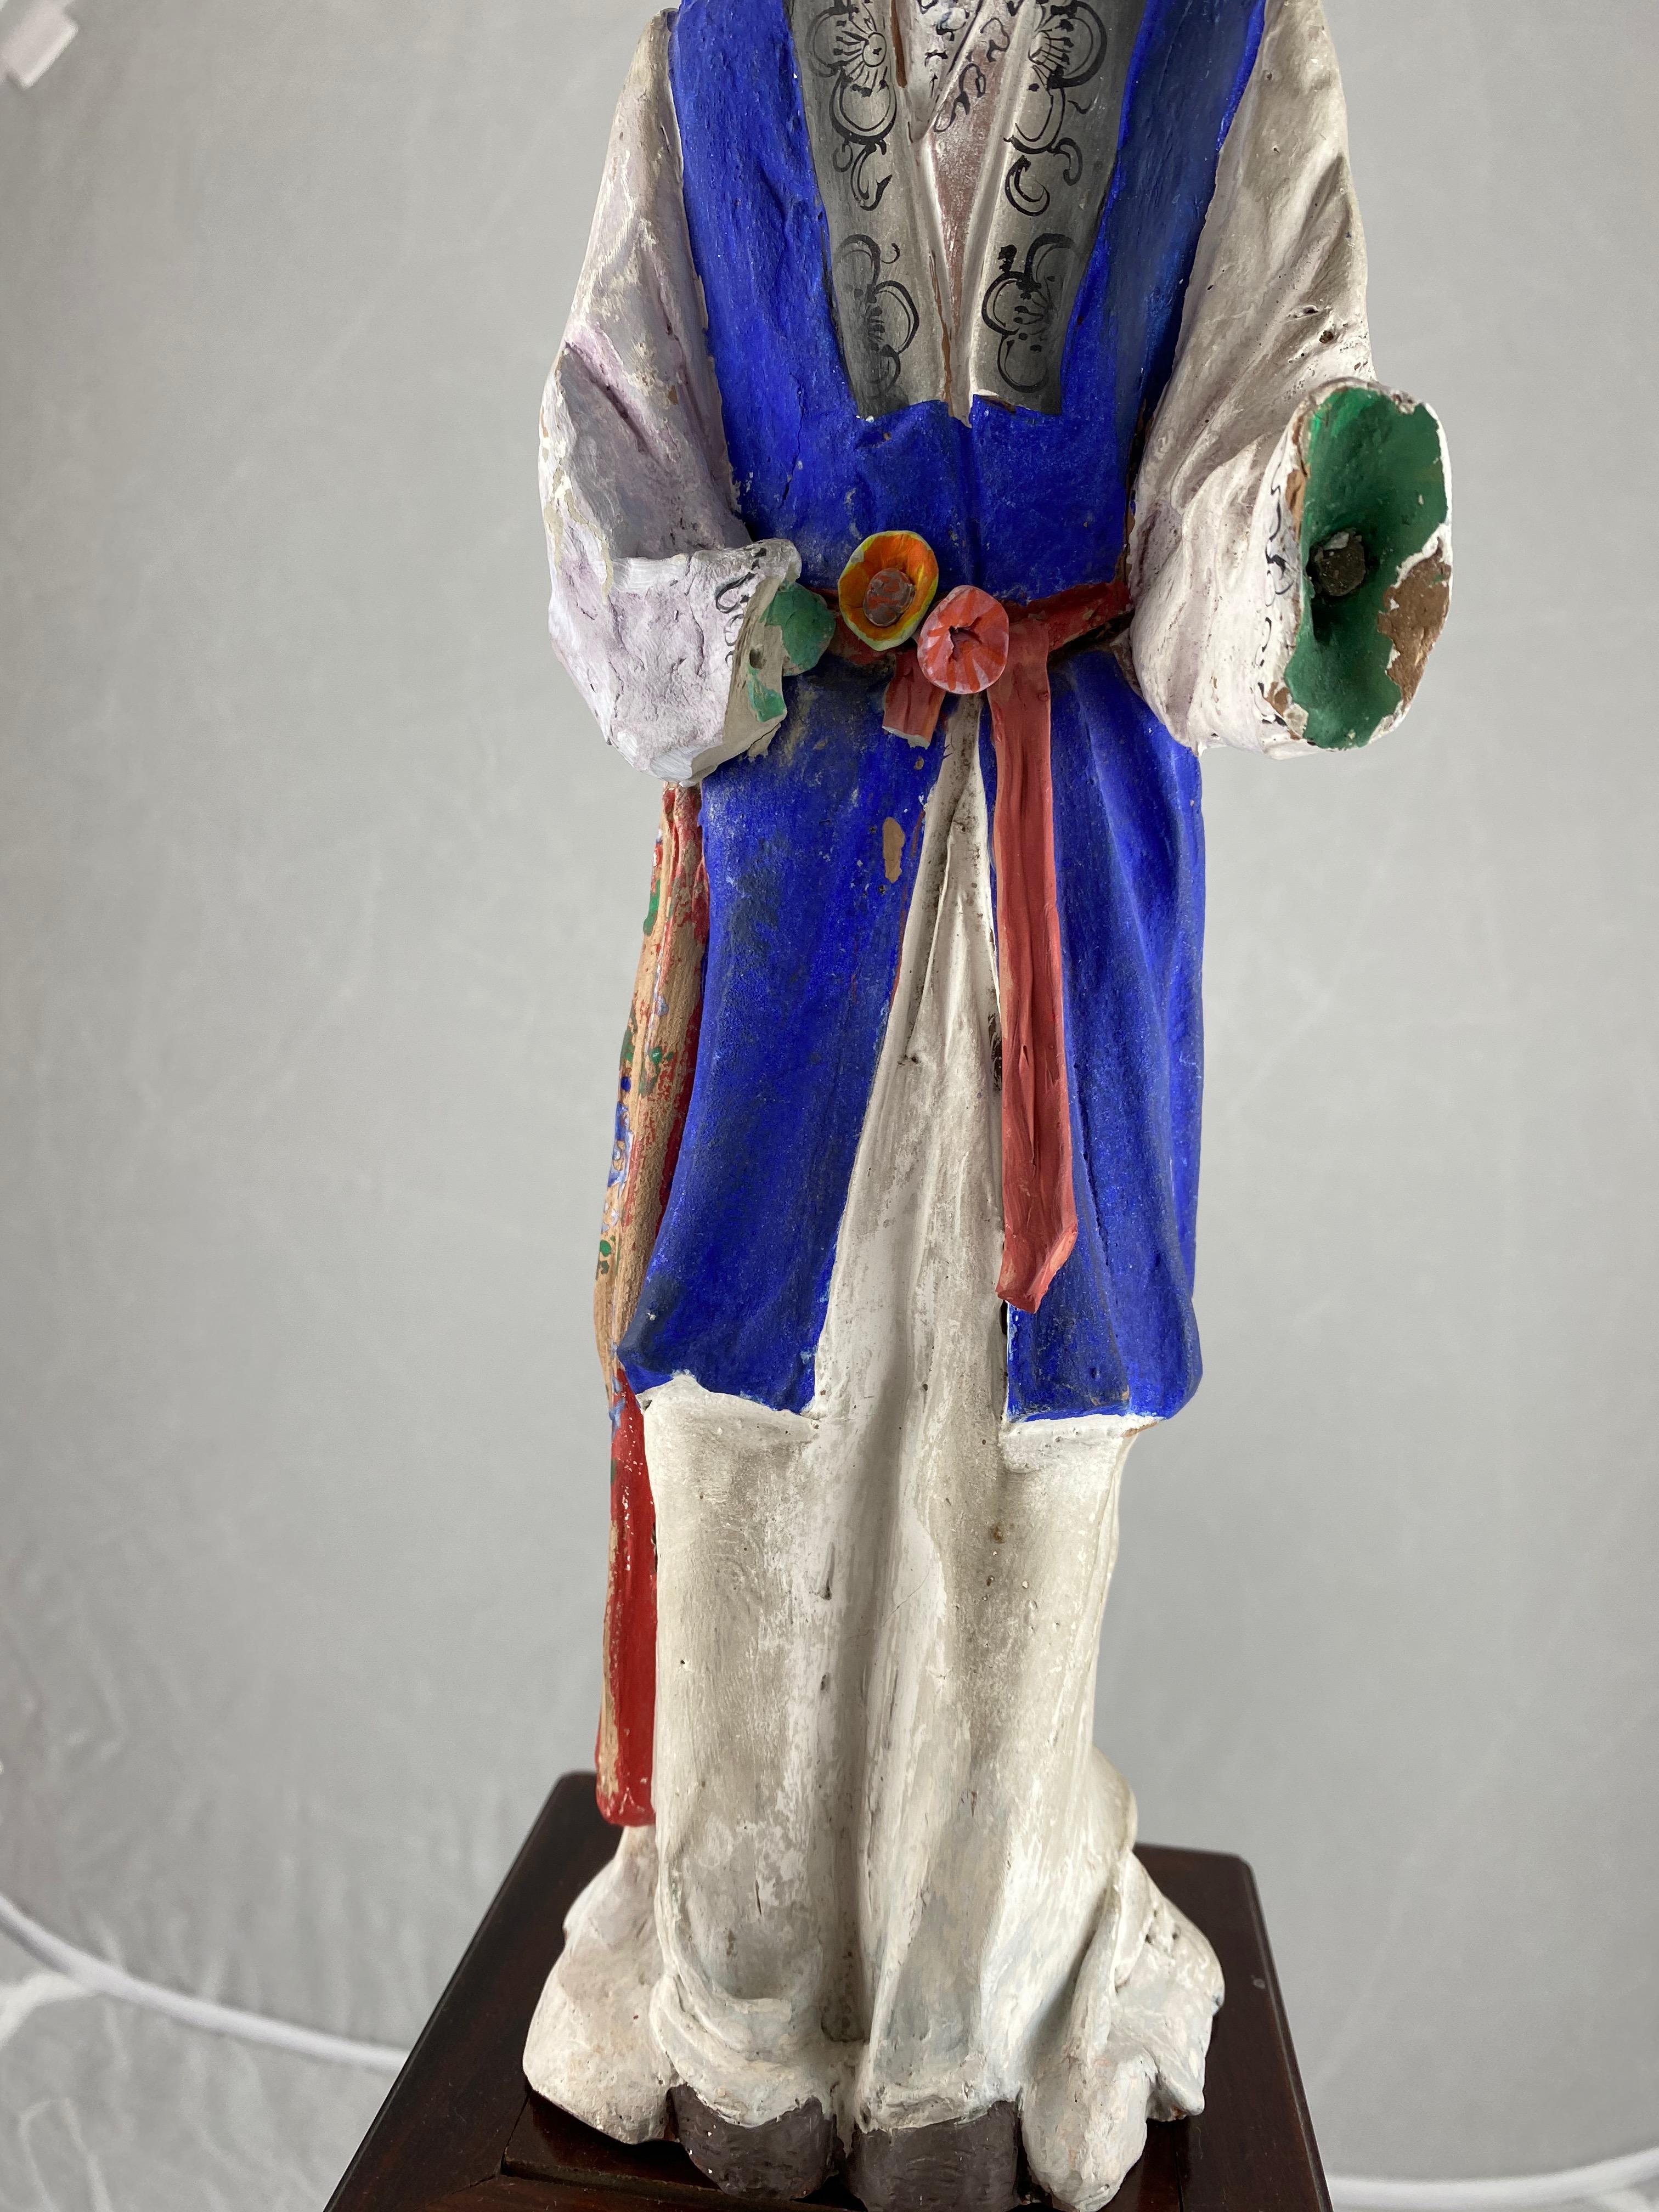 19th Century Chinese Clay-Sculpture, 18th Century For Sale